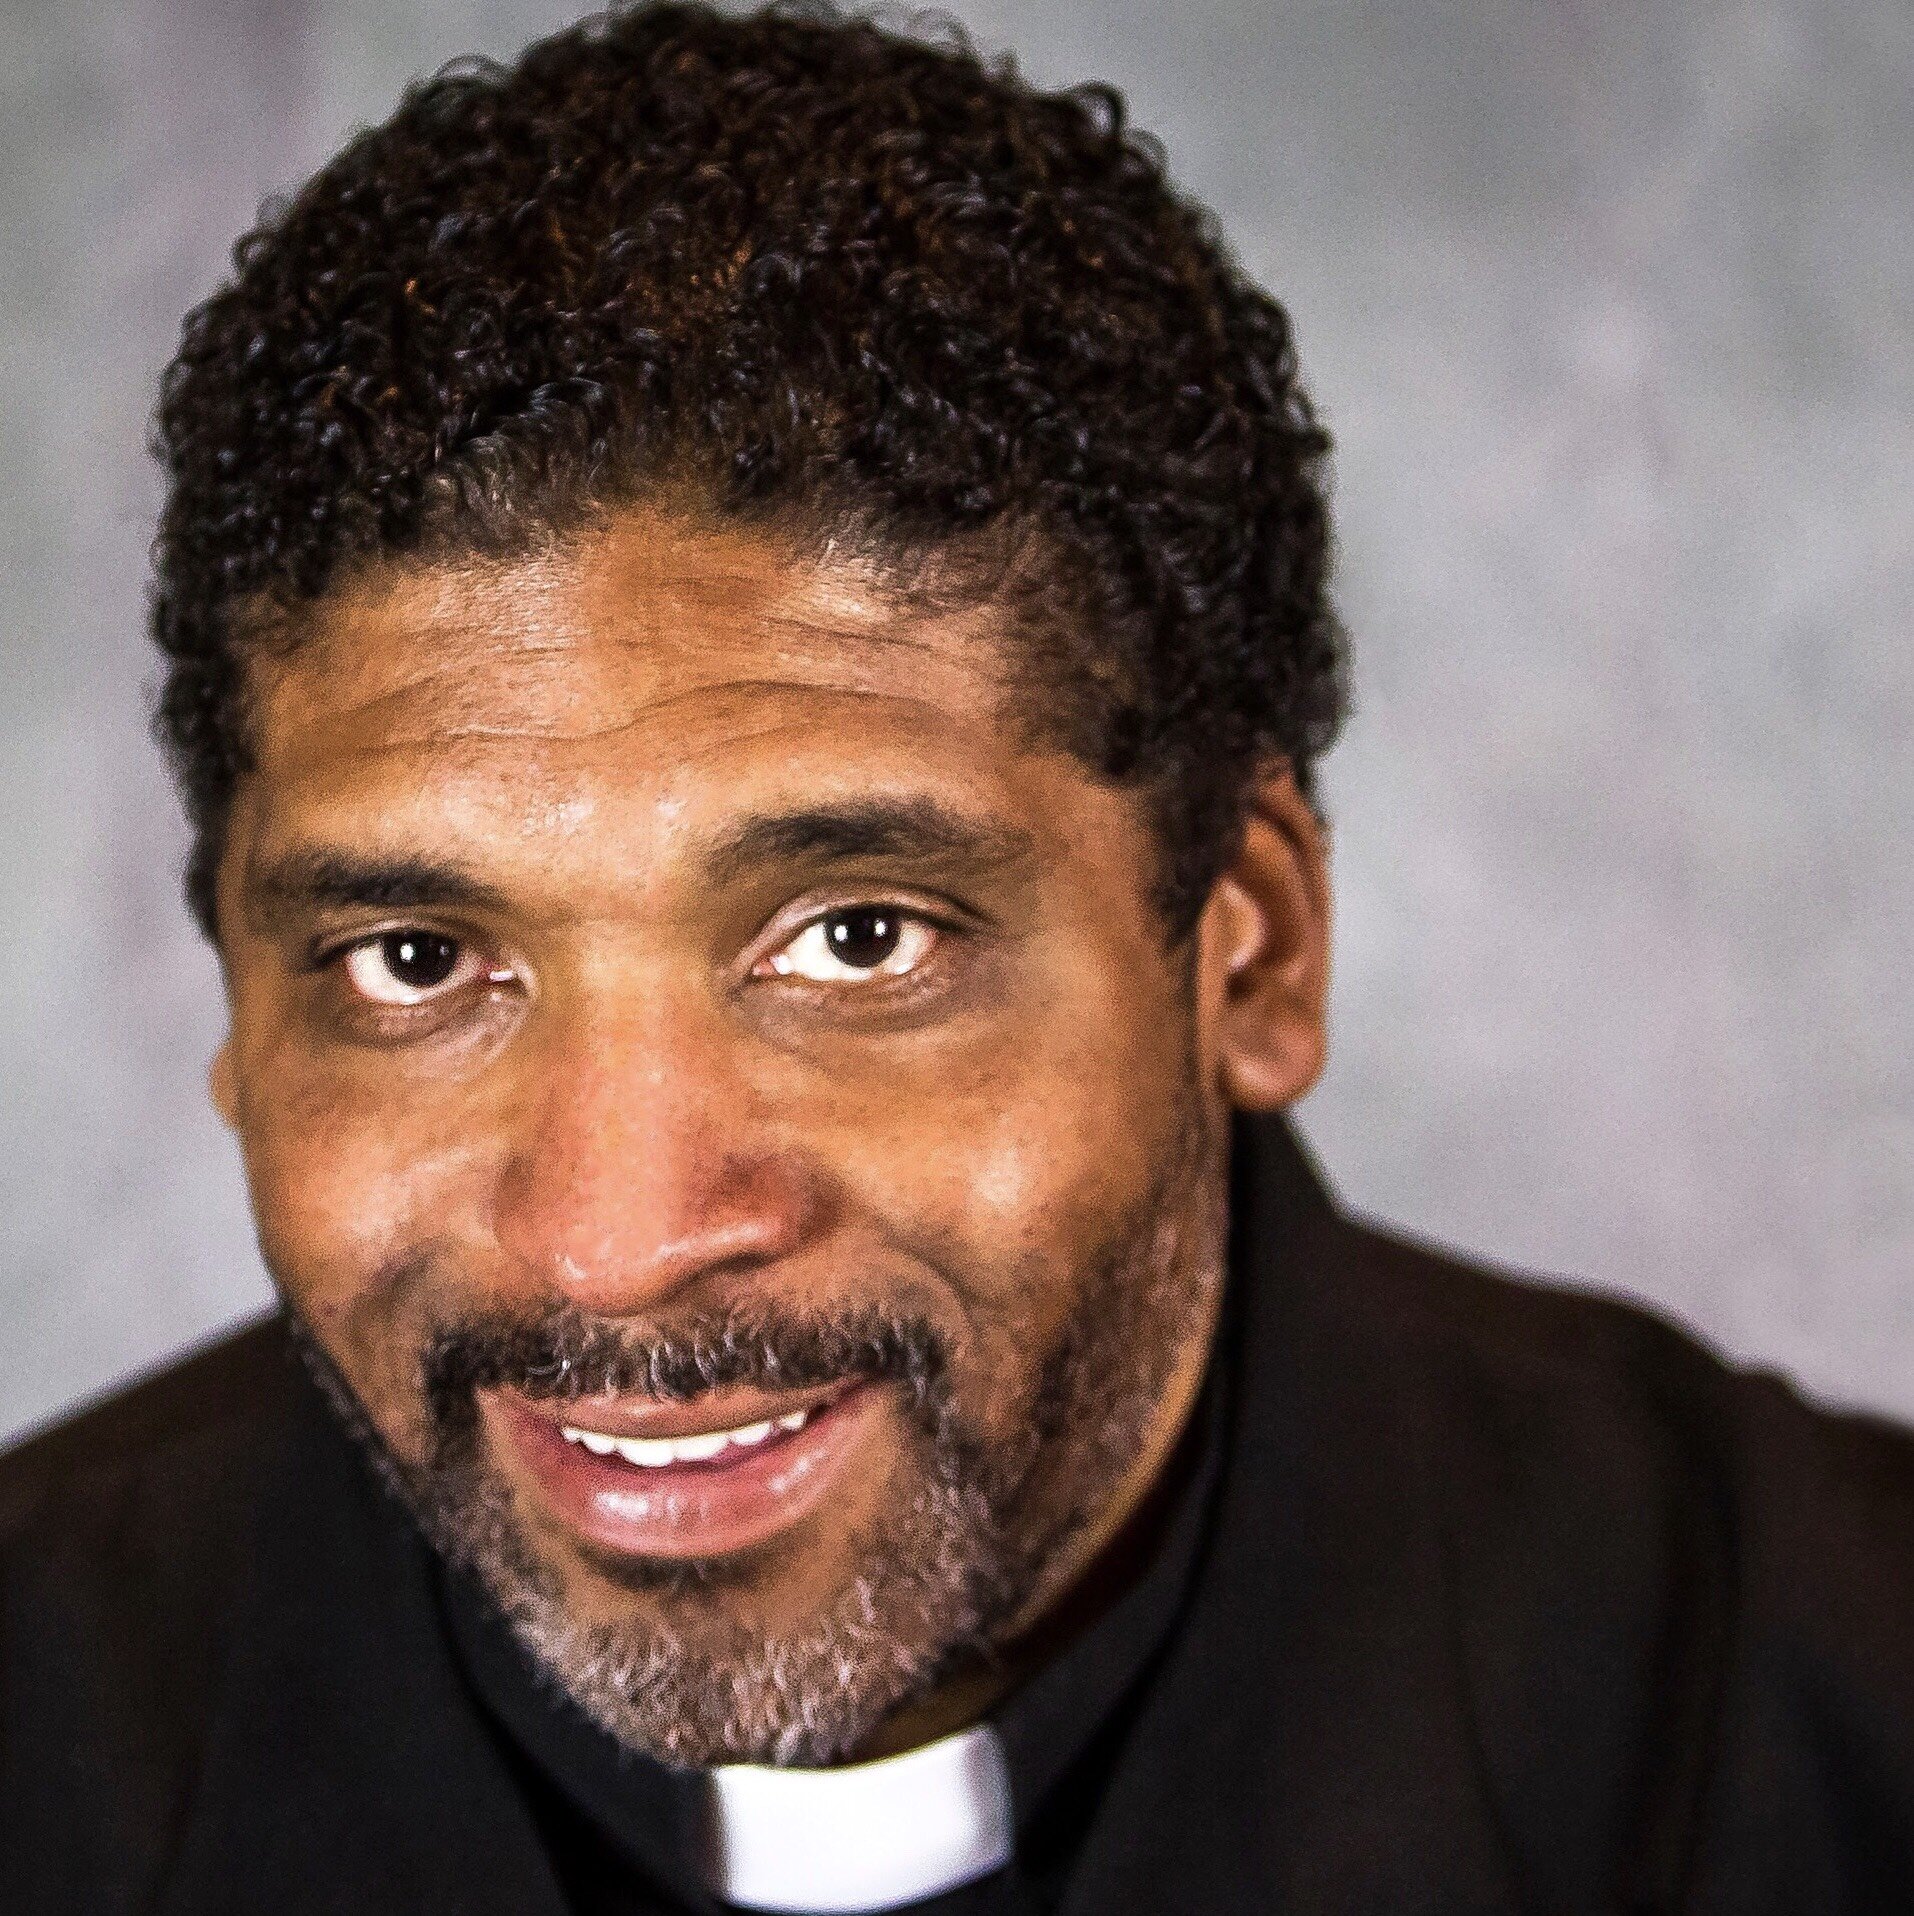 Rev. Dr. William J. Barber, II, President, Repairers of the Breach